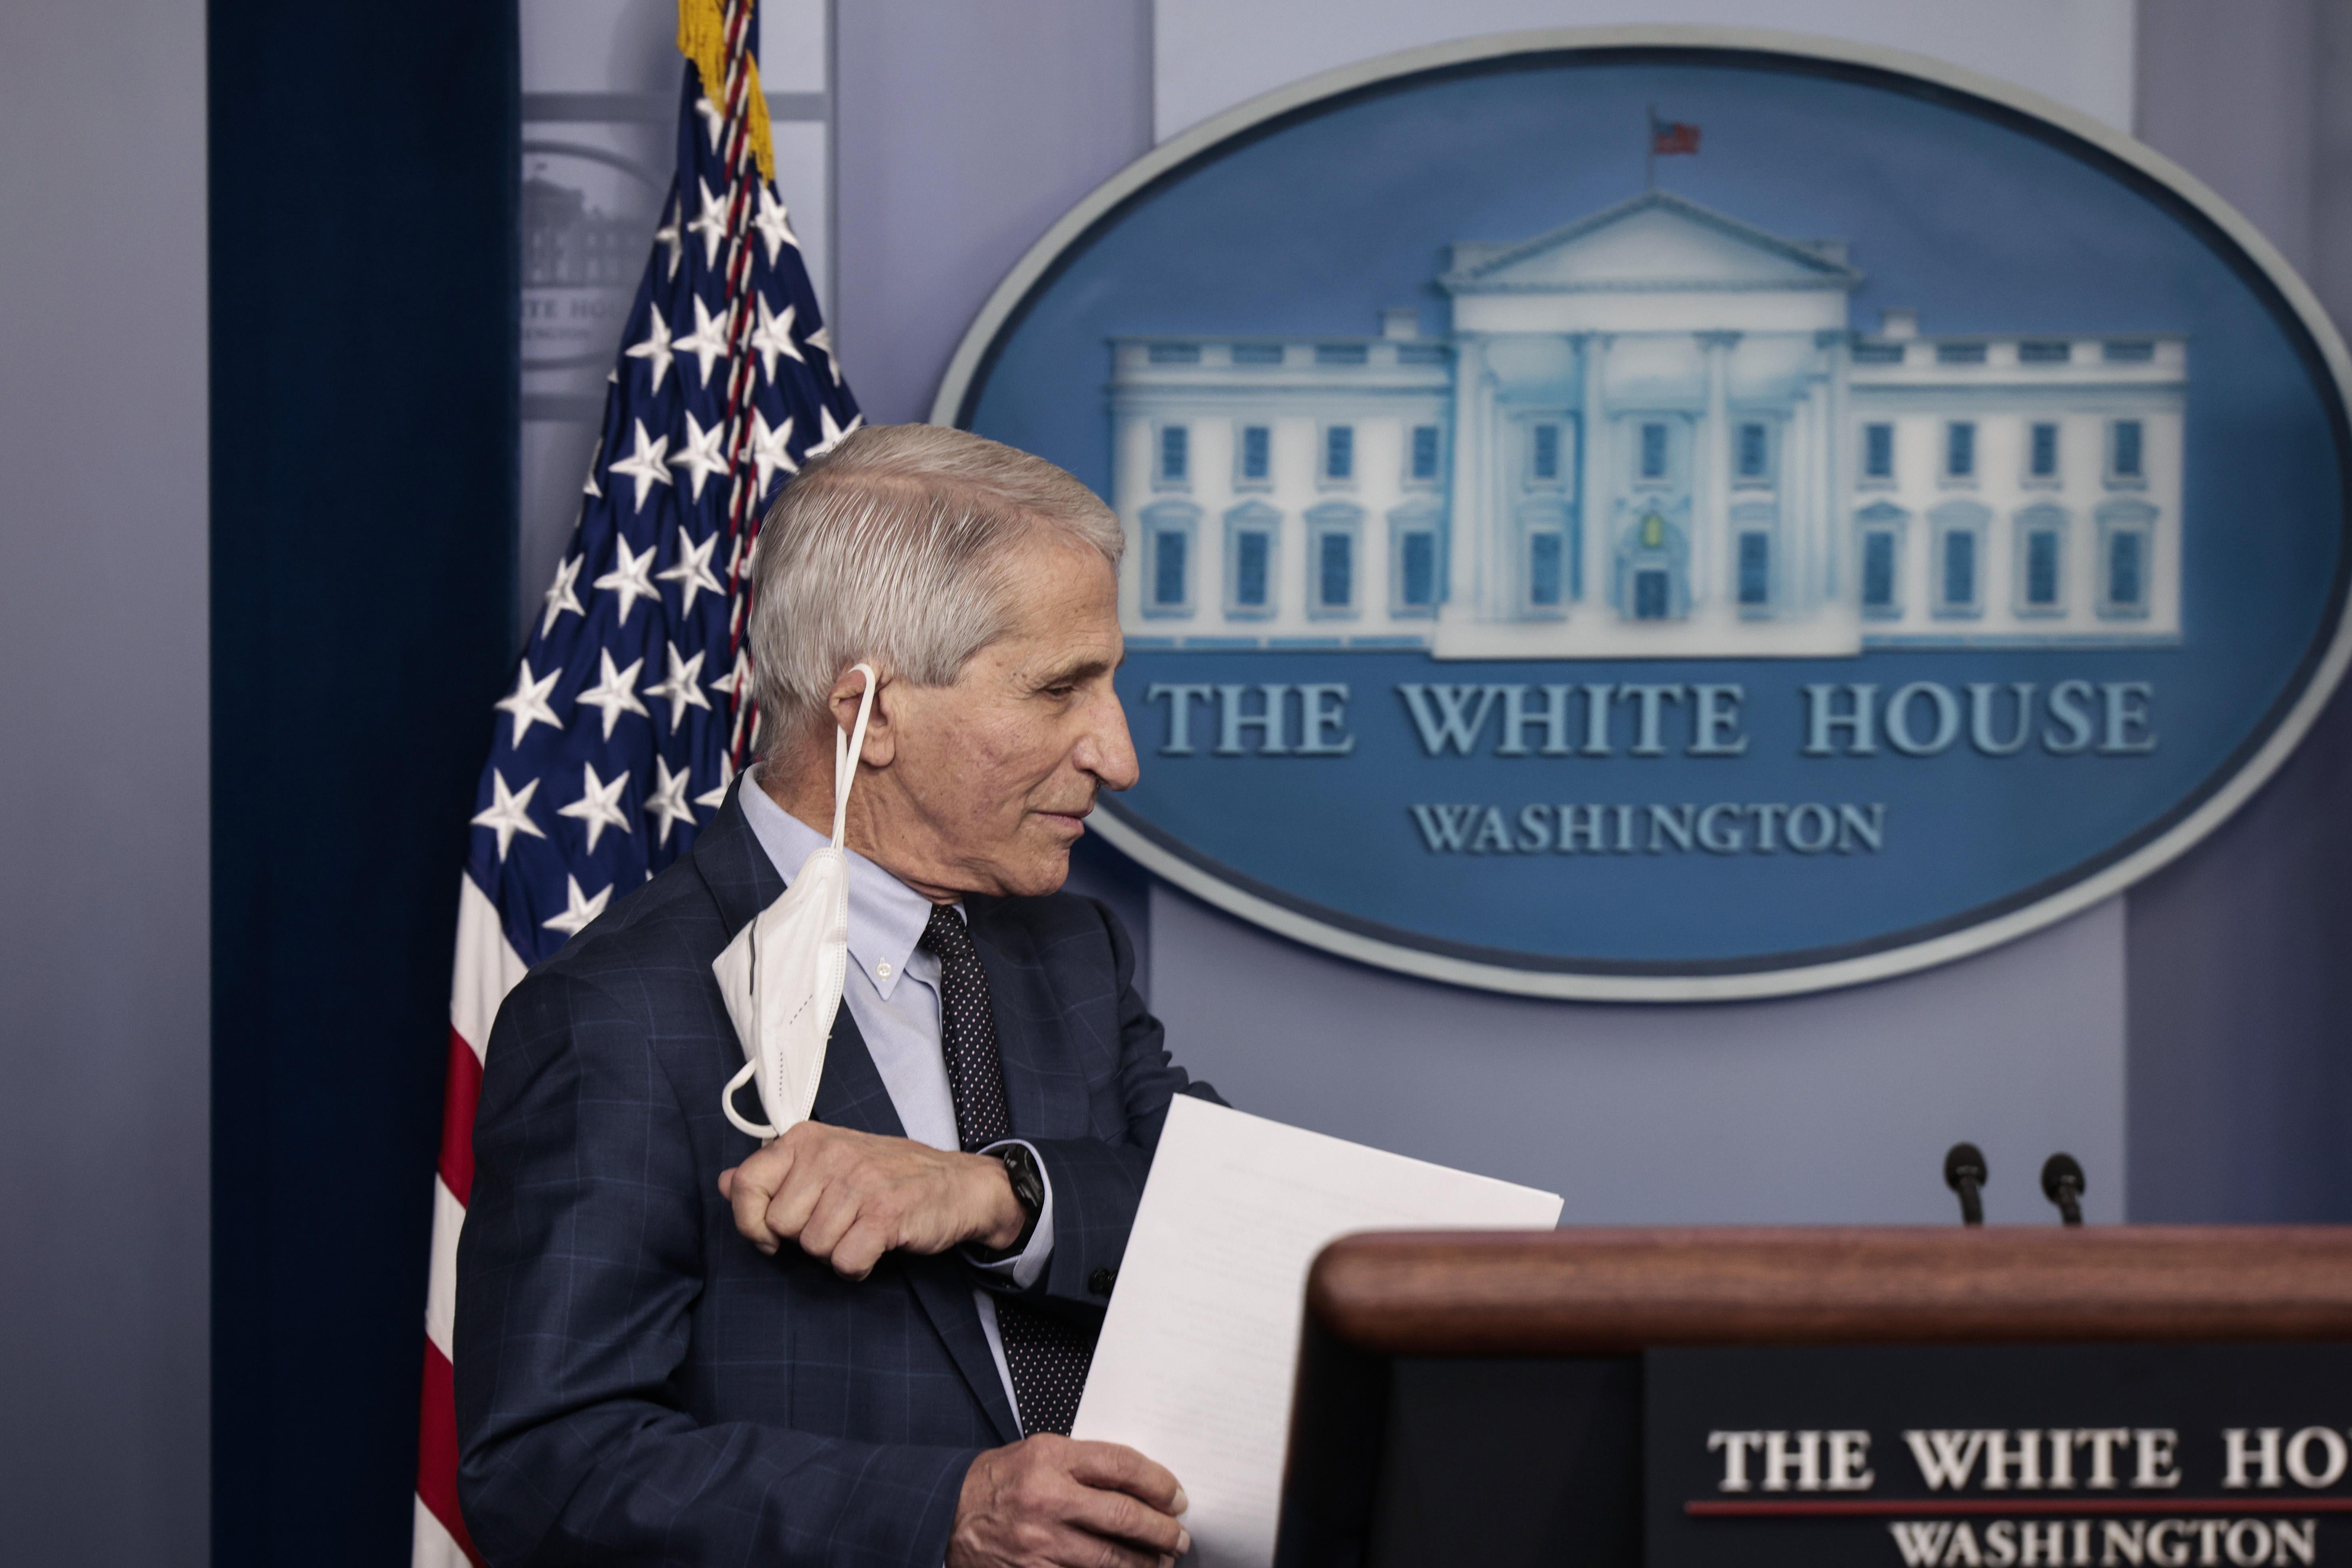 Dr. Anthony Fauci takes his face mask off before giving an update on the omicron COVID-19 variant during the daily press briefing at the White House on December 1, 2021 in Washington, D.C.